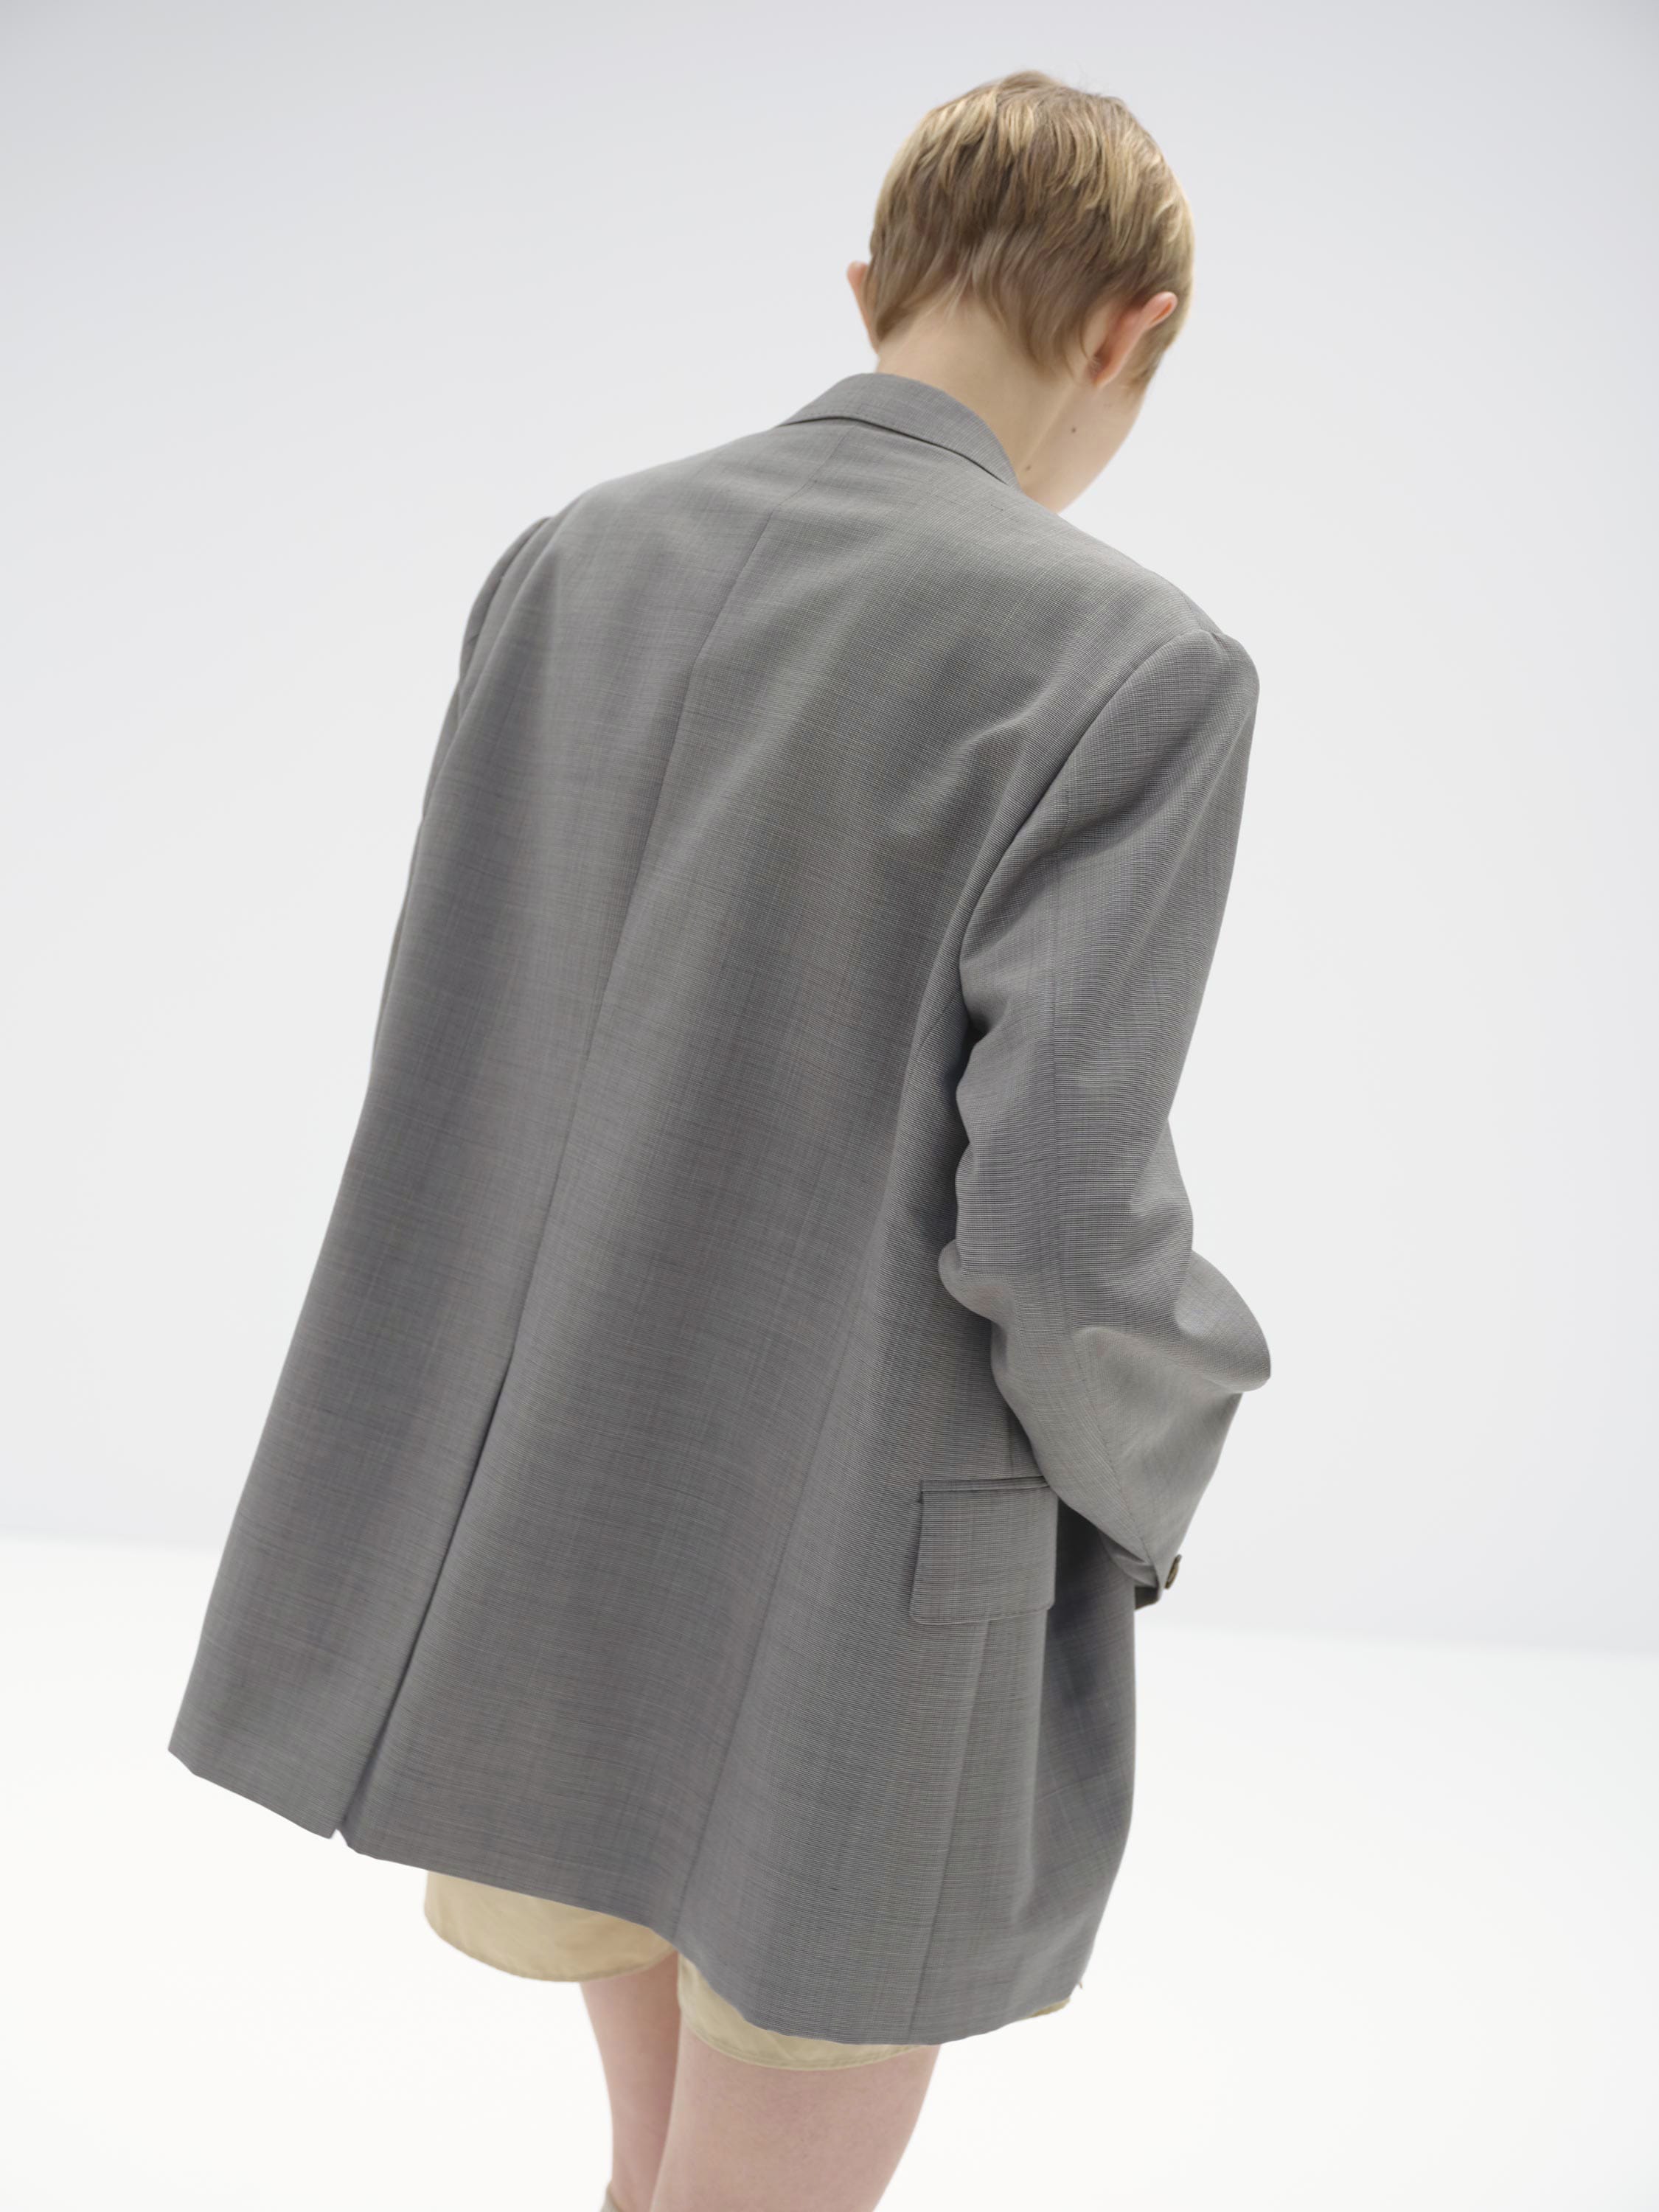 TROPICAL WOOL KID MOHAIR JACKET 詳細画像 GRAY CHECK 4